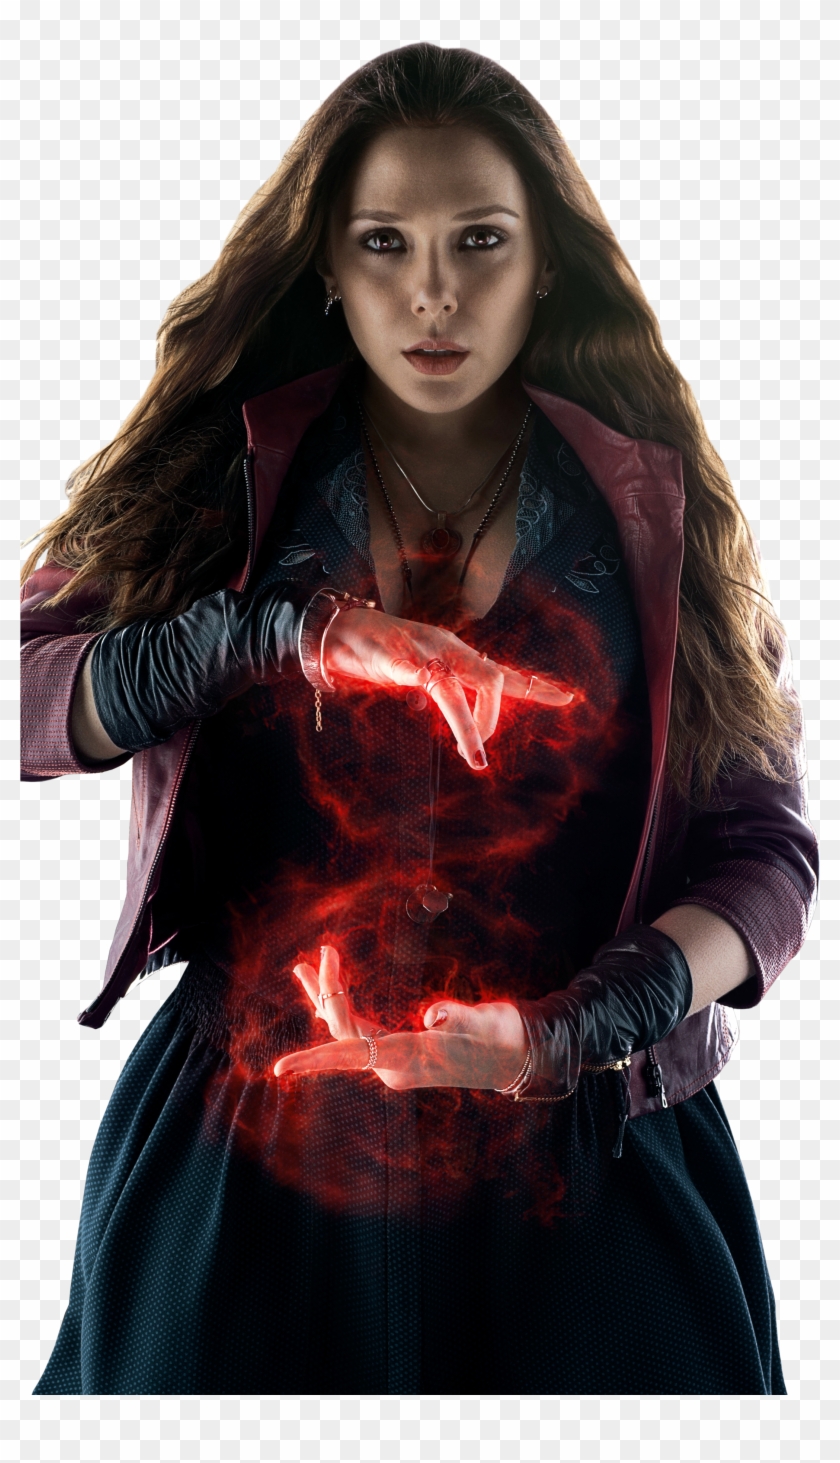 Avengers Scarlet Witch Brother Png Download Wanda Maximoff